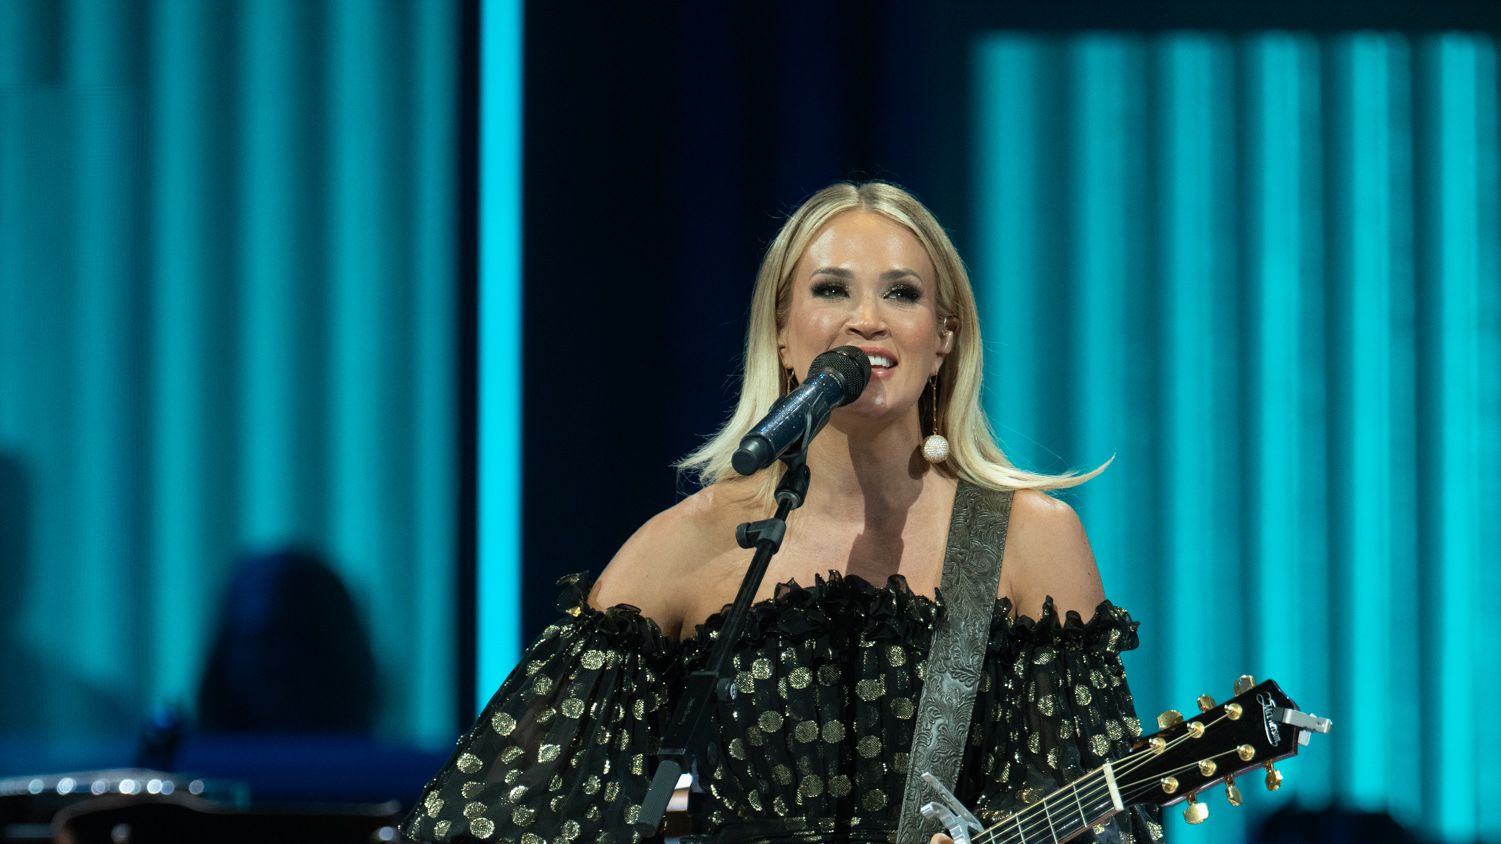 Carrie Underwood joins country artists with fashion line